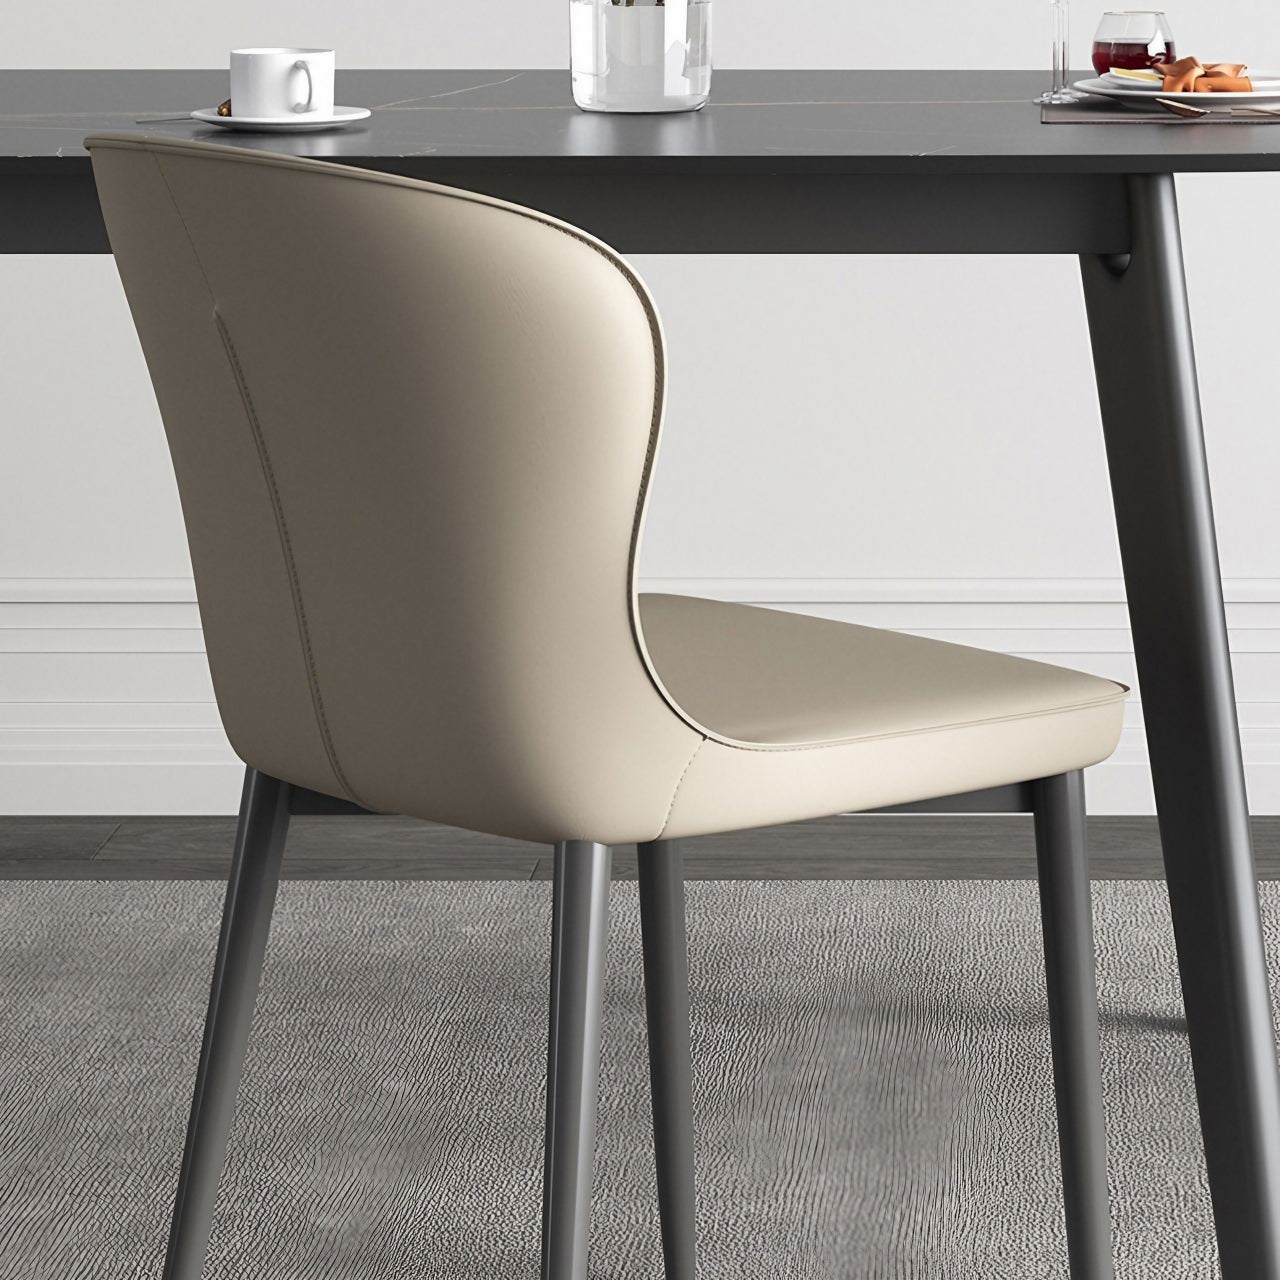 Modern leather dining chair with semi-wrapped backrest in a contemporary minimalist design